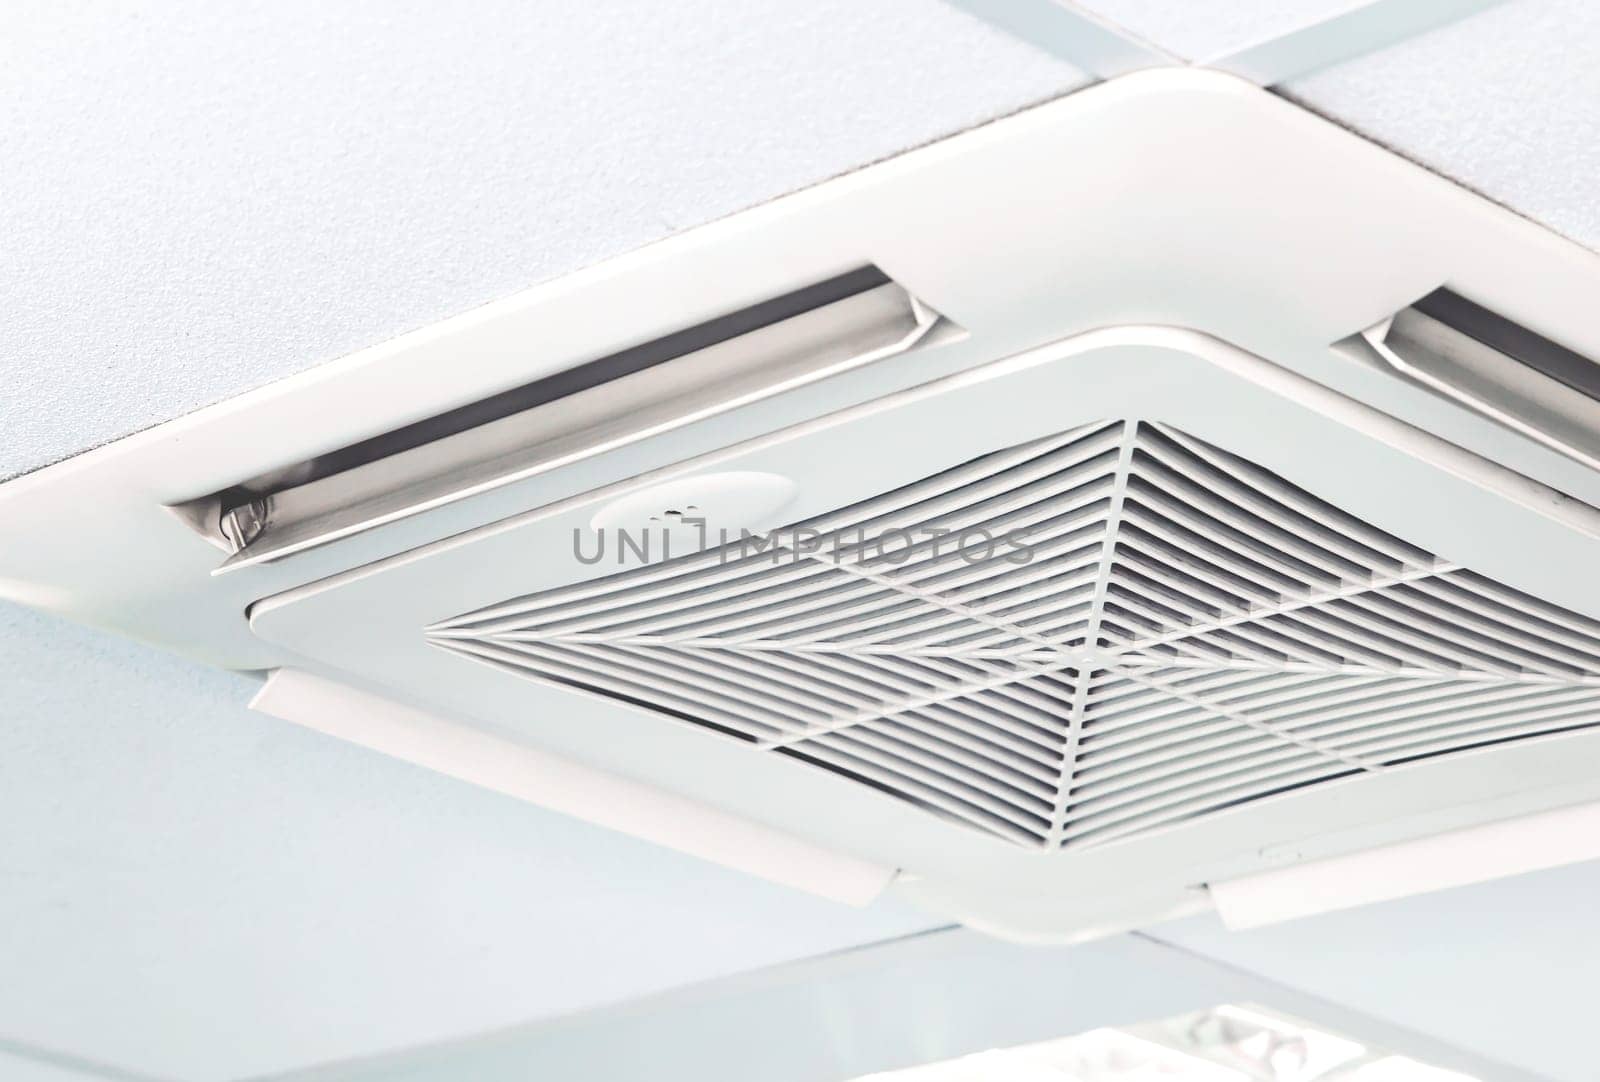 Modern air conditioning system installed on the ceiling